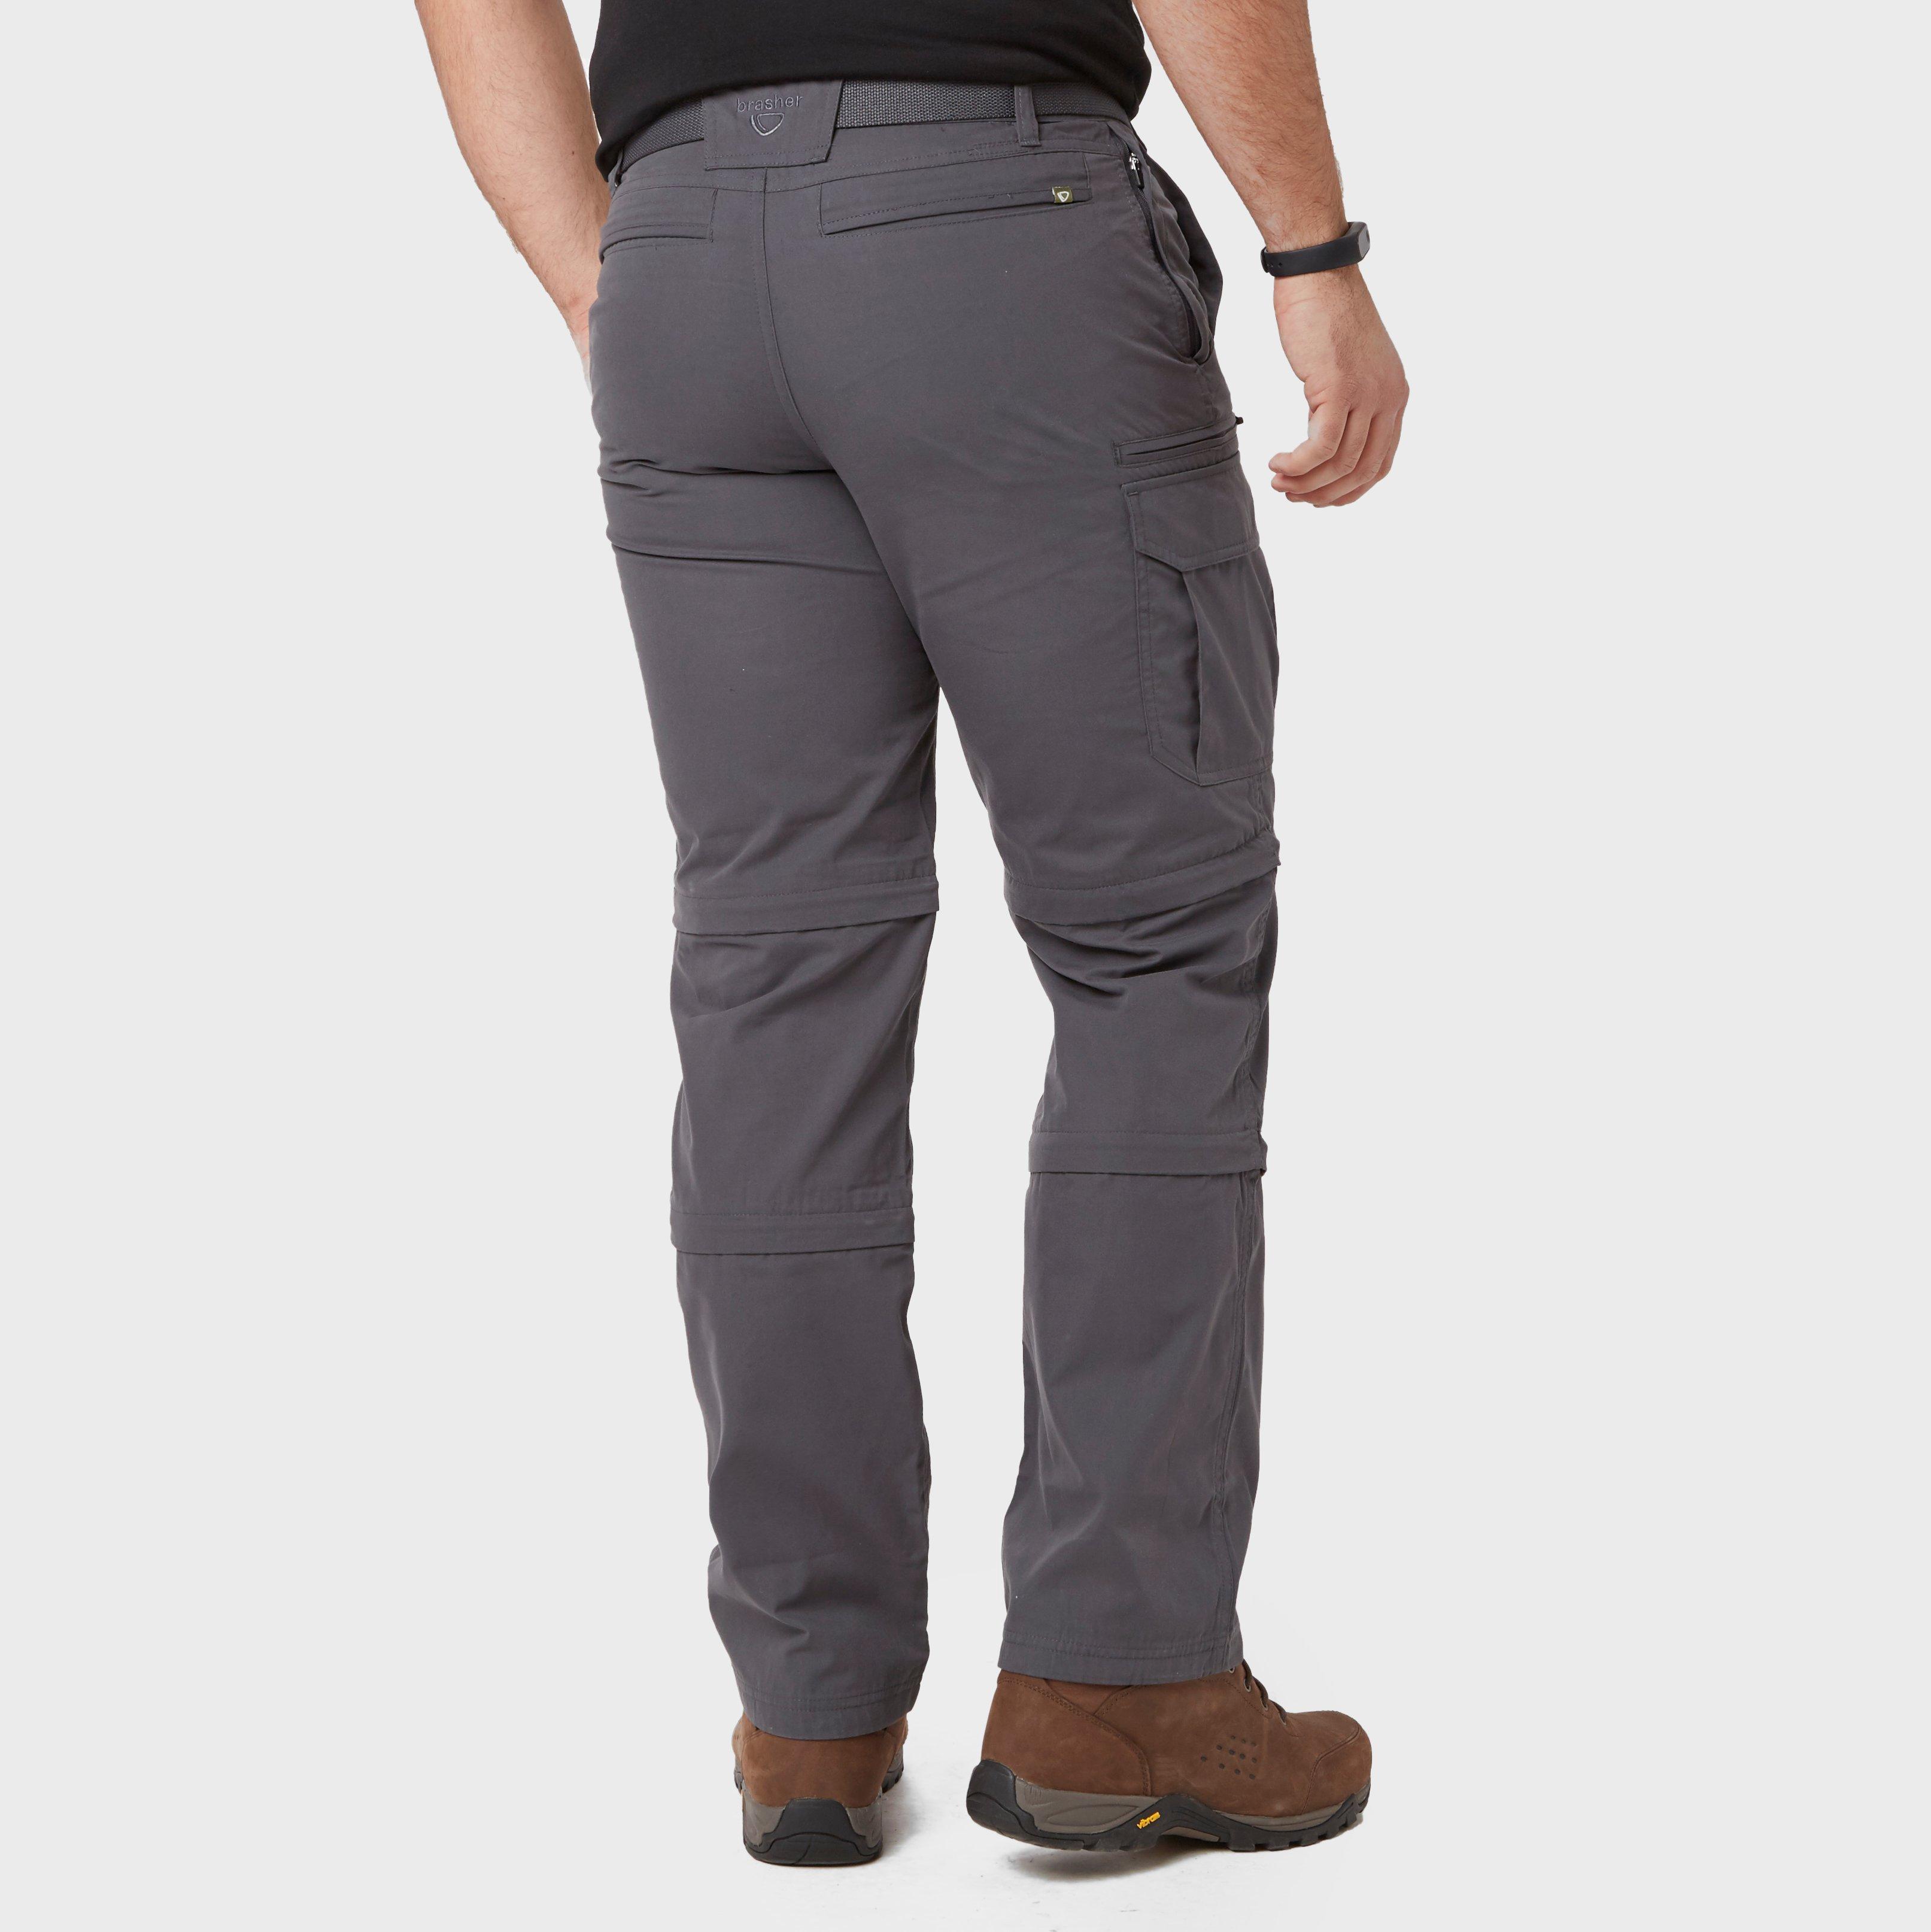 Brasher Men's Double Zip-Off Trousers Review